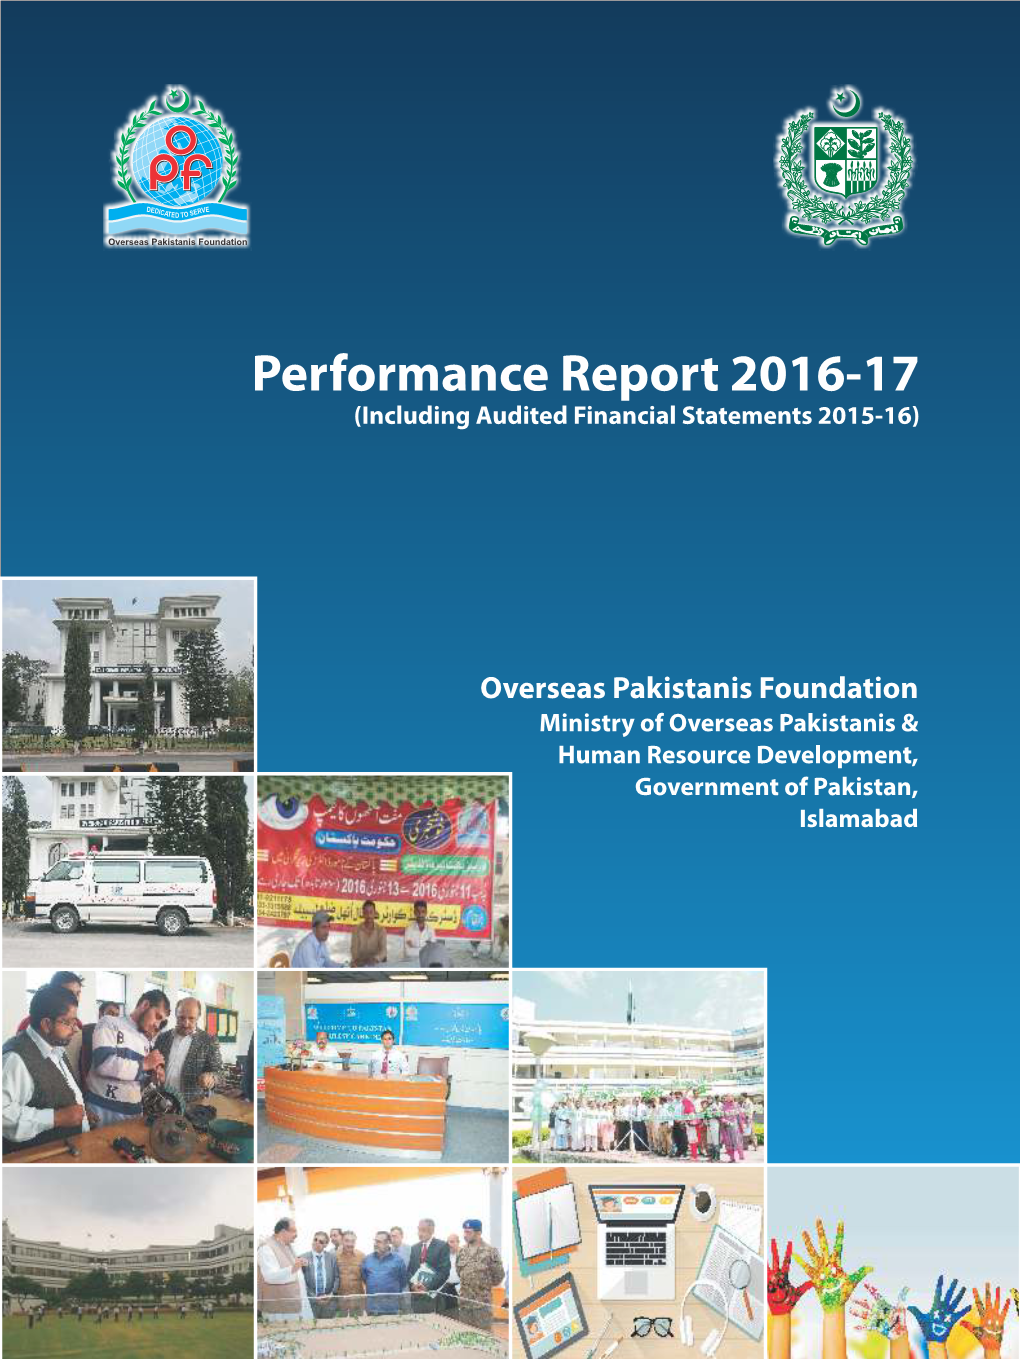 Performance Report 2016-17 (Including Audited Financial Statements 2015-16)